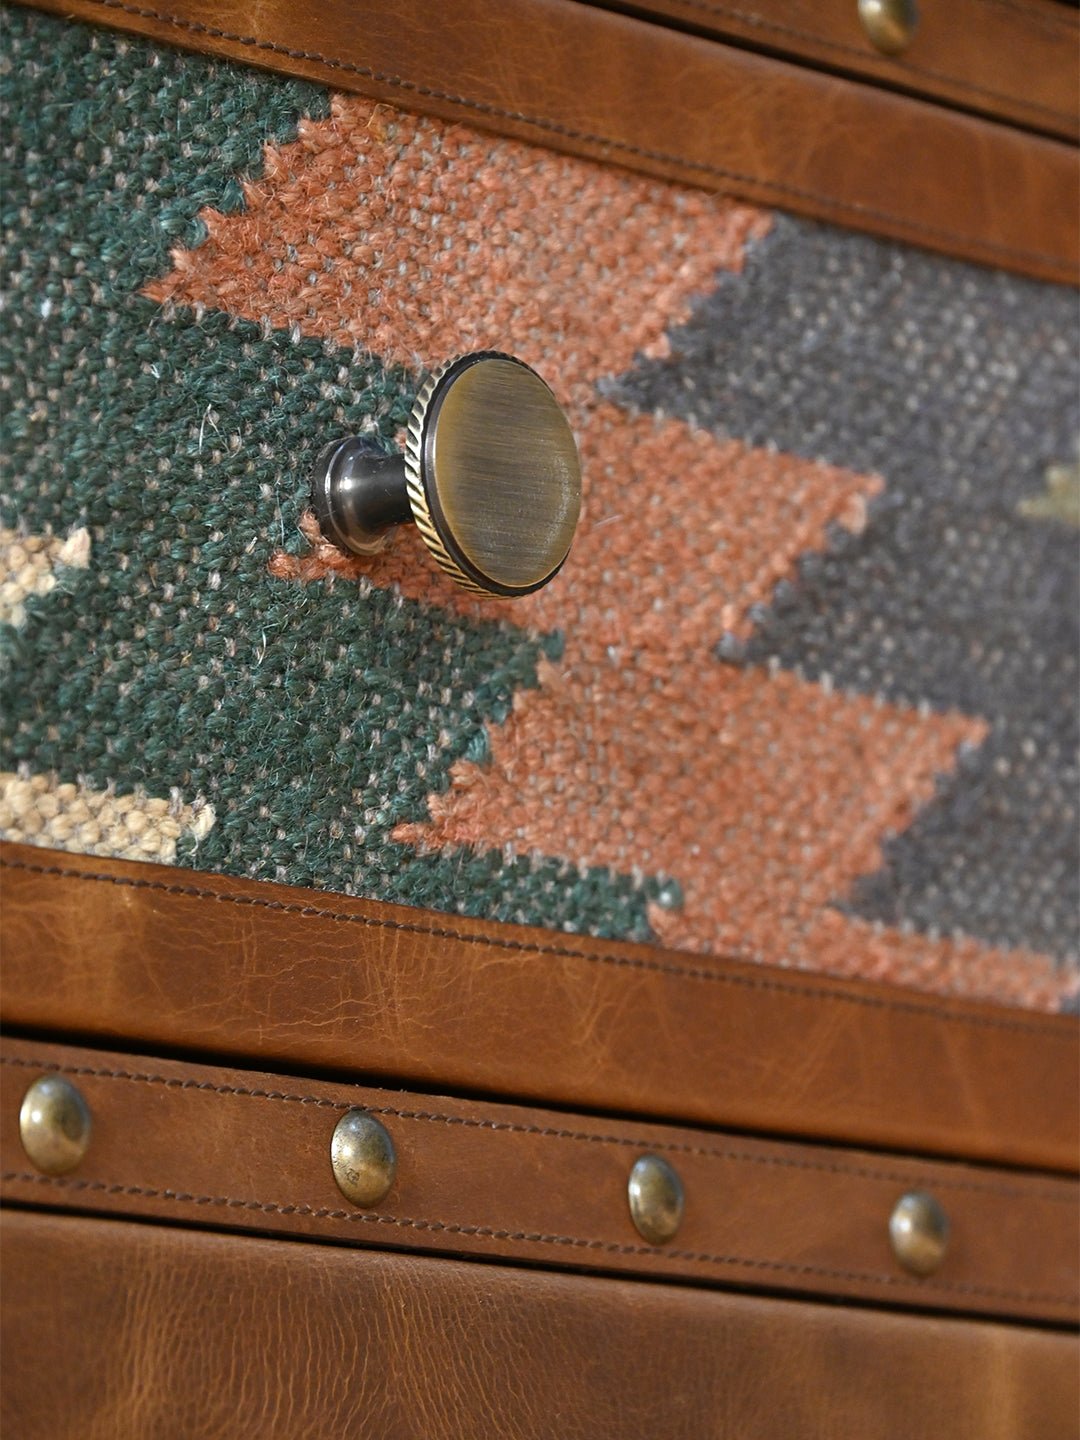 ACCENT CHEST OF DRAWERS - KILIM AND LEATHER - ART AVENUE